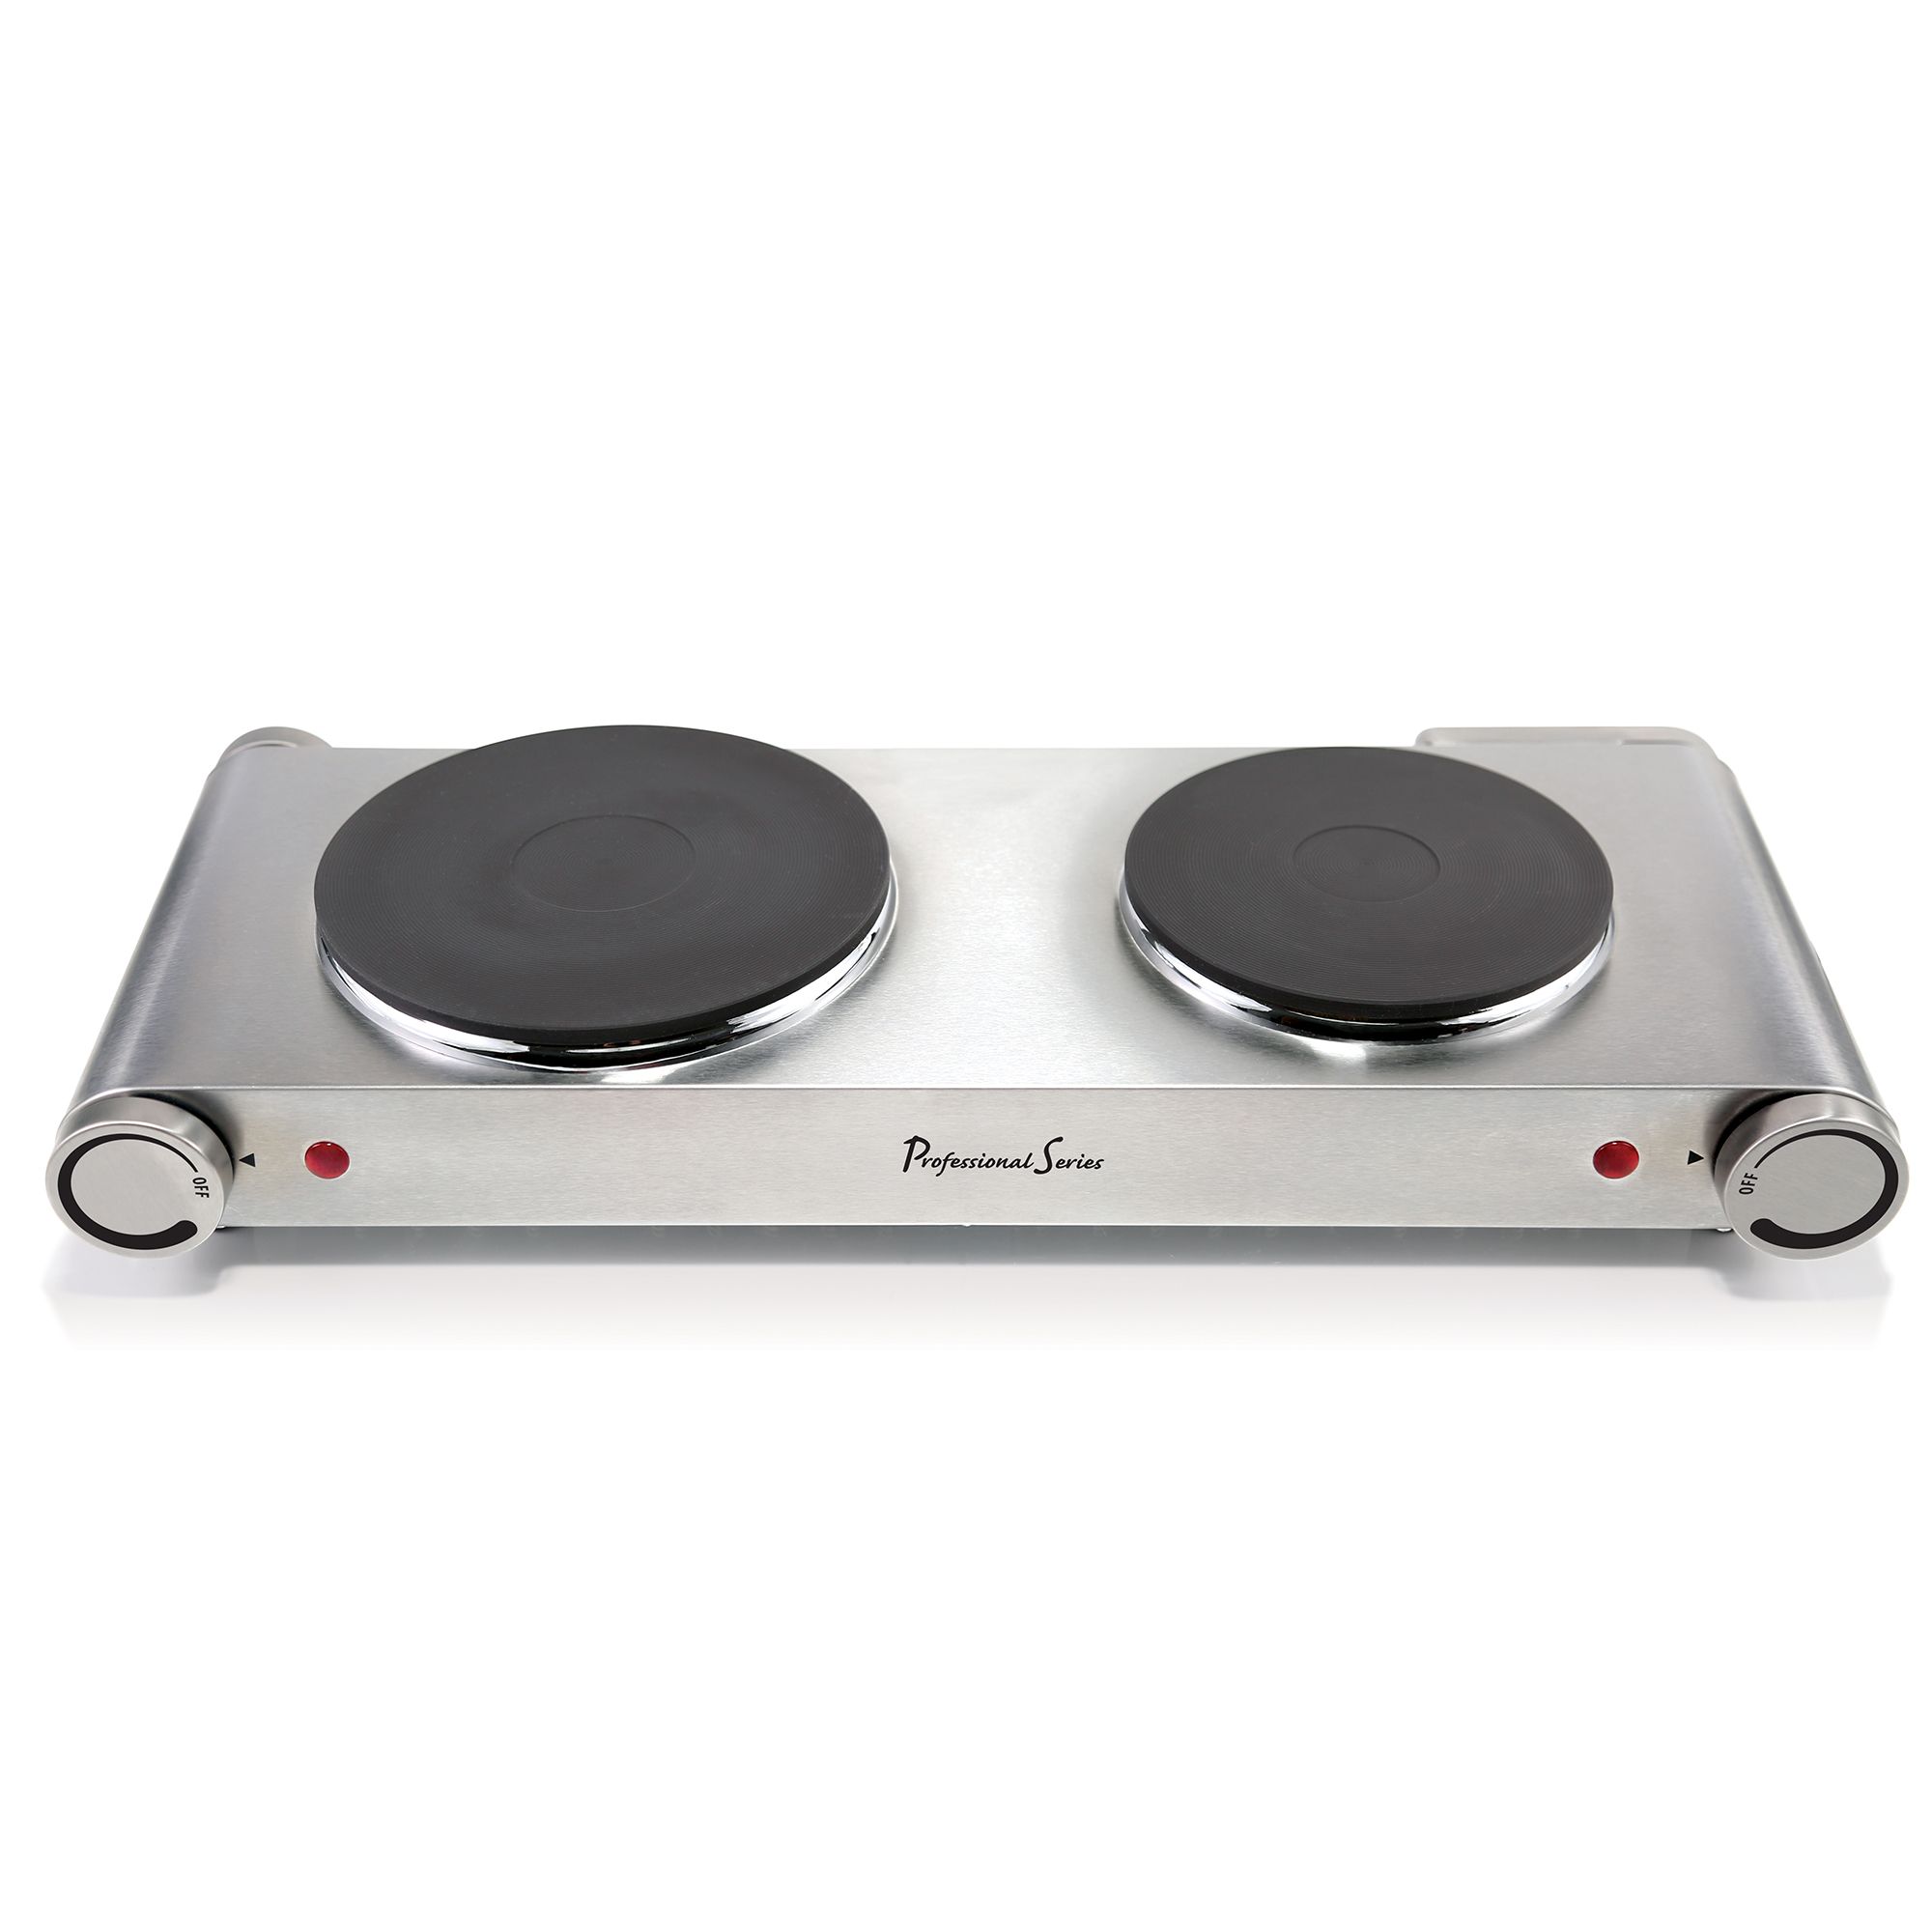 Stainless Steel Double Burner